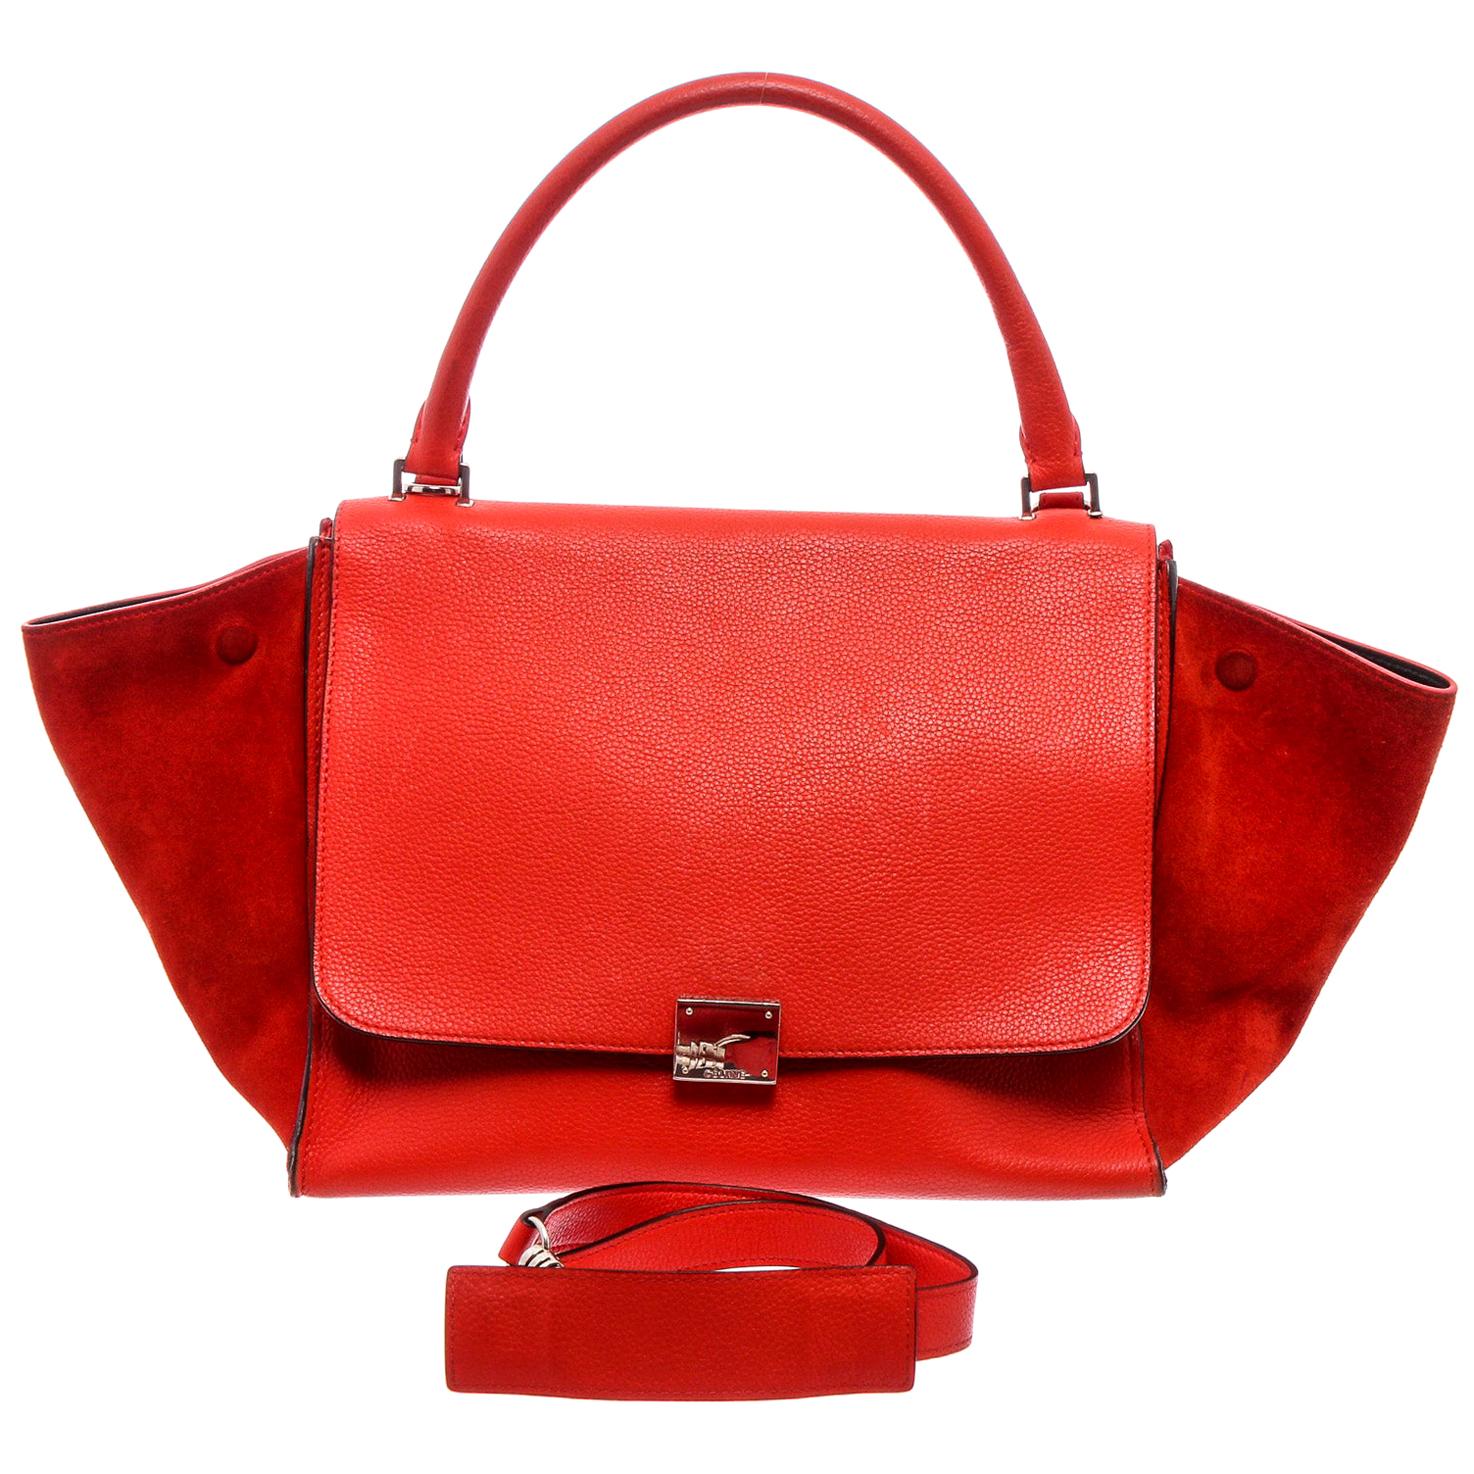 Celine Red Leather Medium Trapeze Tote Bag